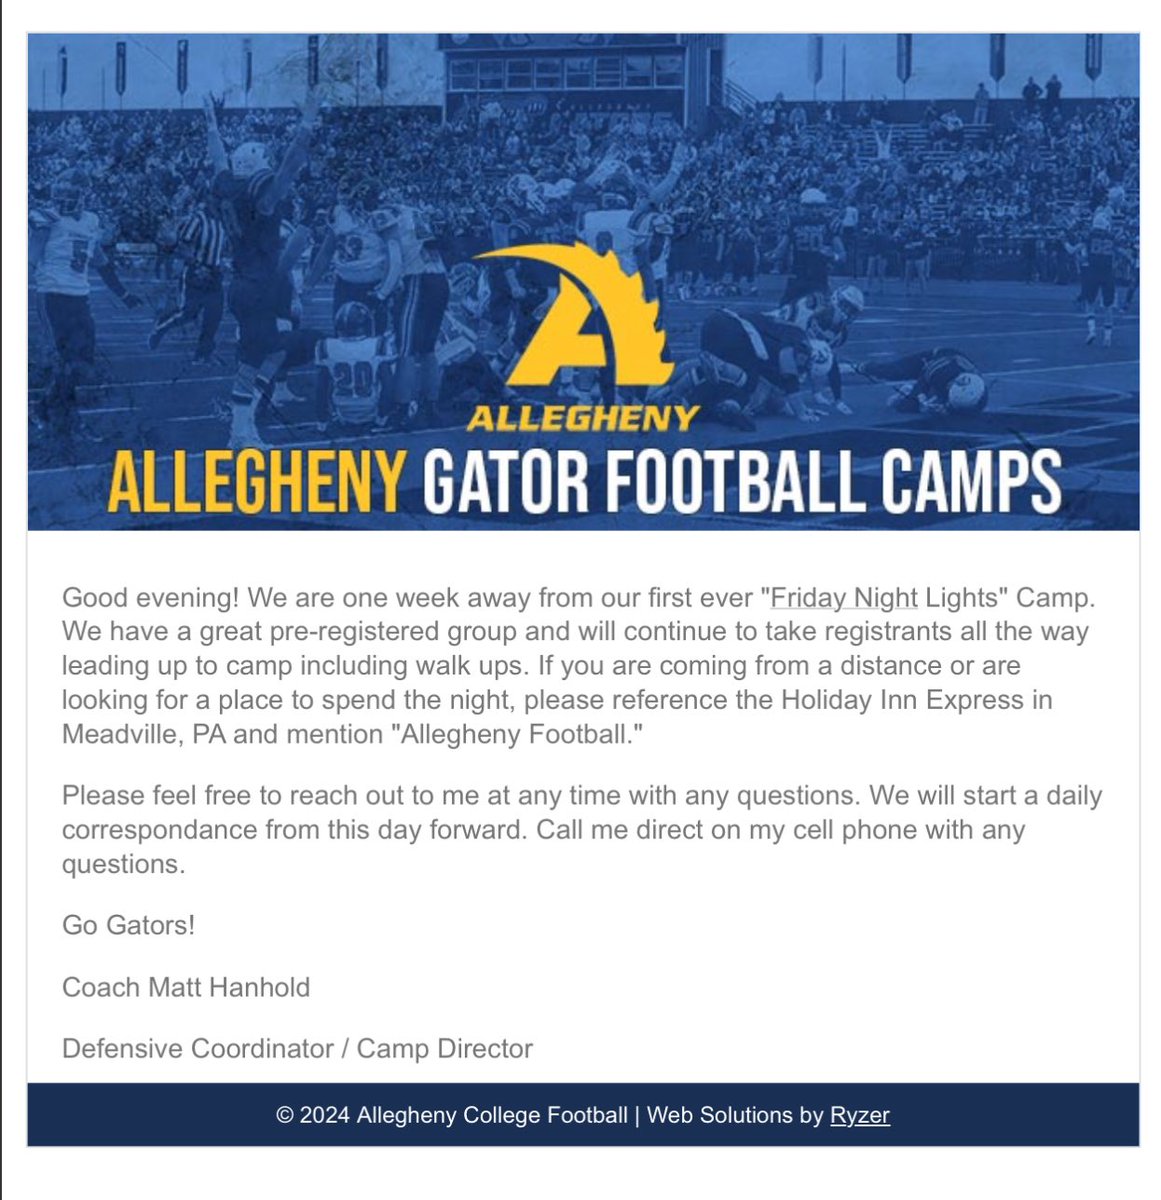 Excited to be at the @AlleghenyFB Friday night lights camps May 10th. Thank you to @CoachHanhold for the invite and can’t wait to meet you. @FitchFootball @CoachTJ_Parker